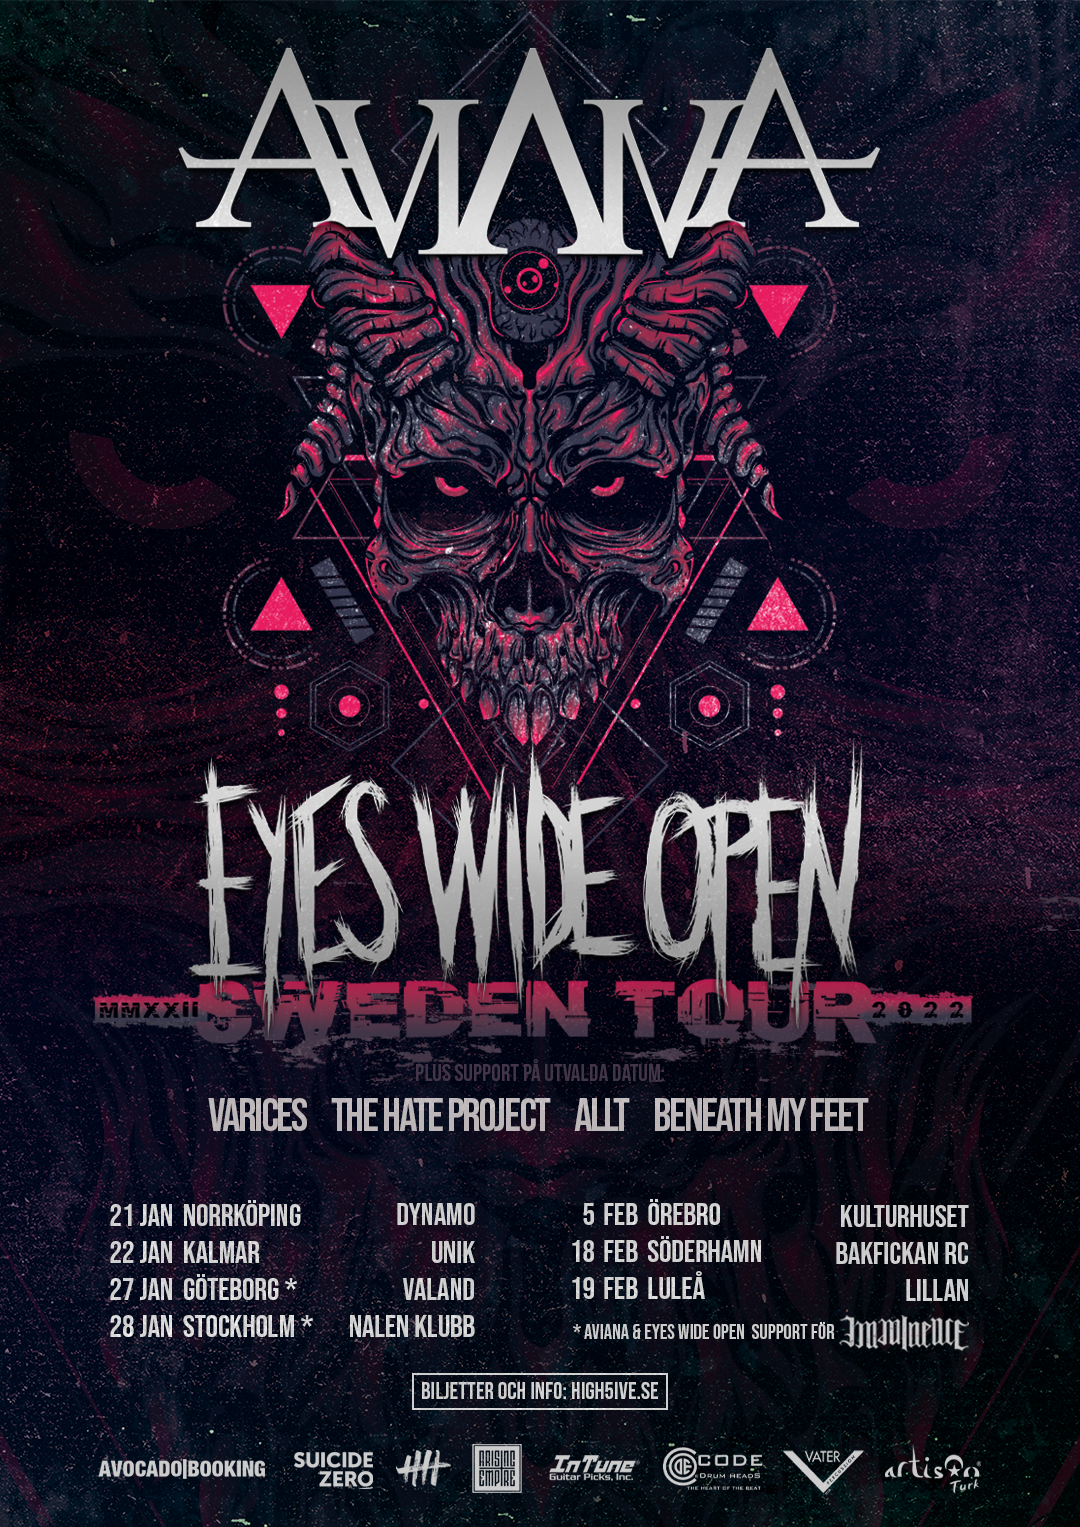 Aviana + Eyes Wide Open Tour 2022 Poster